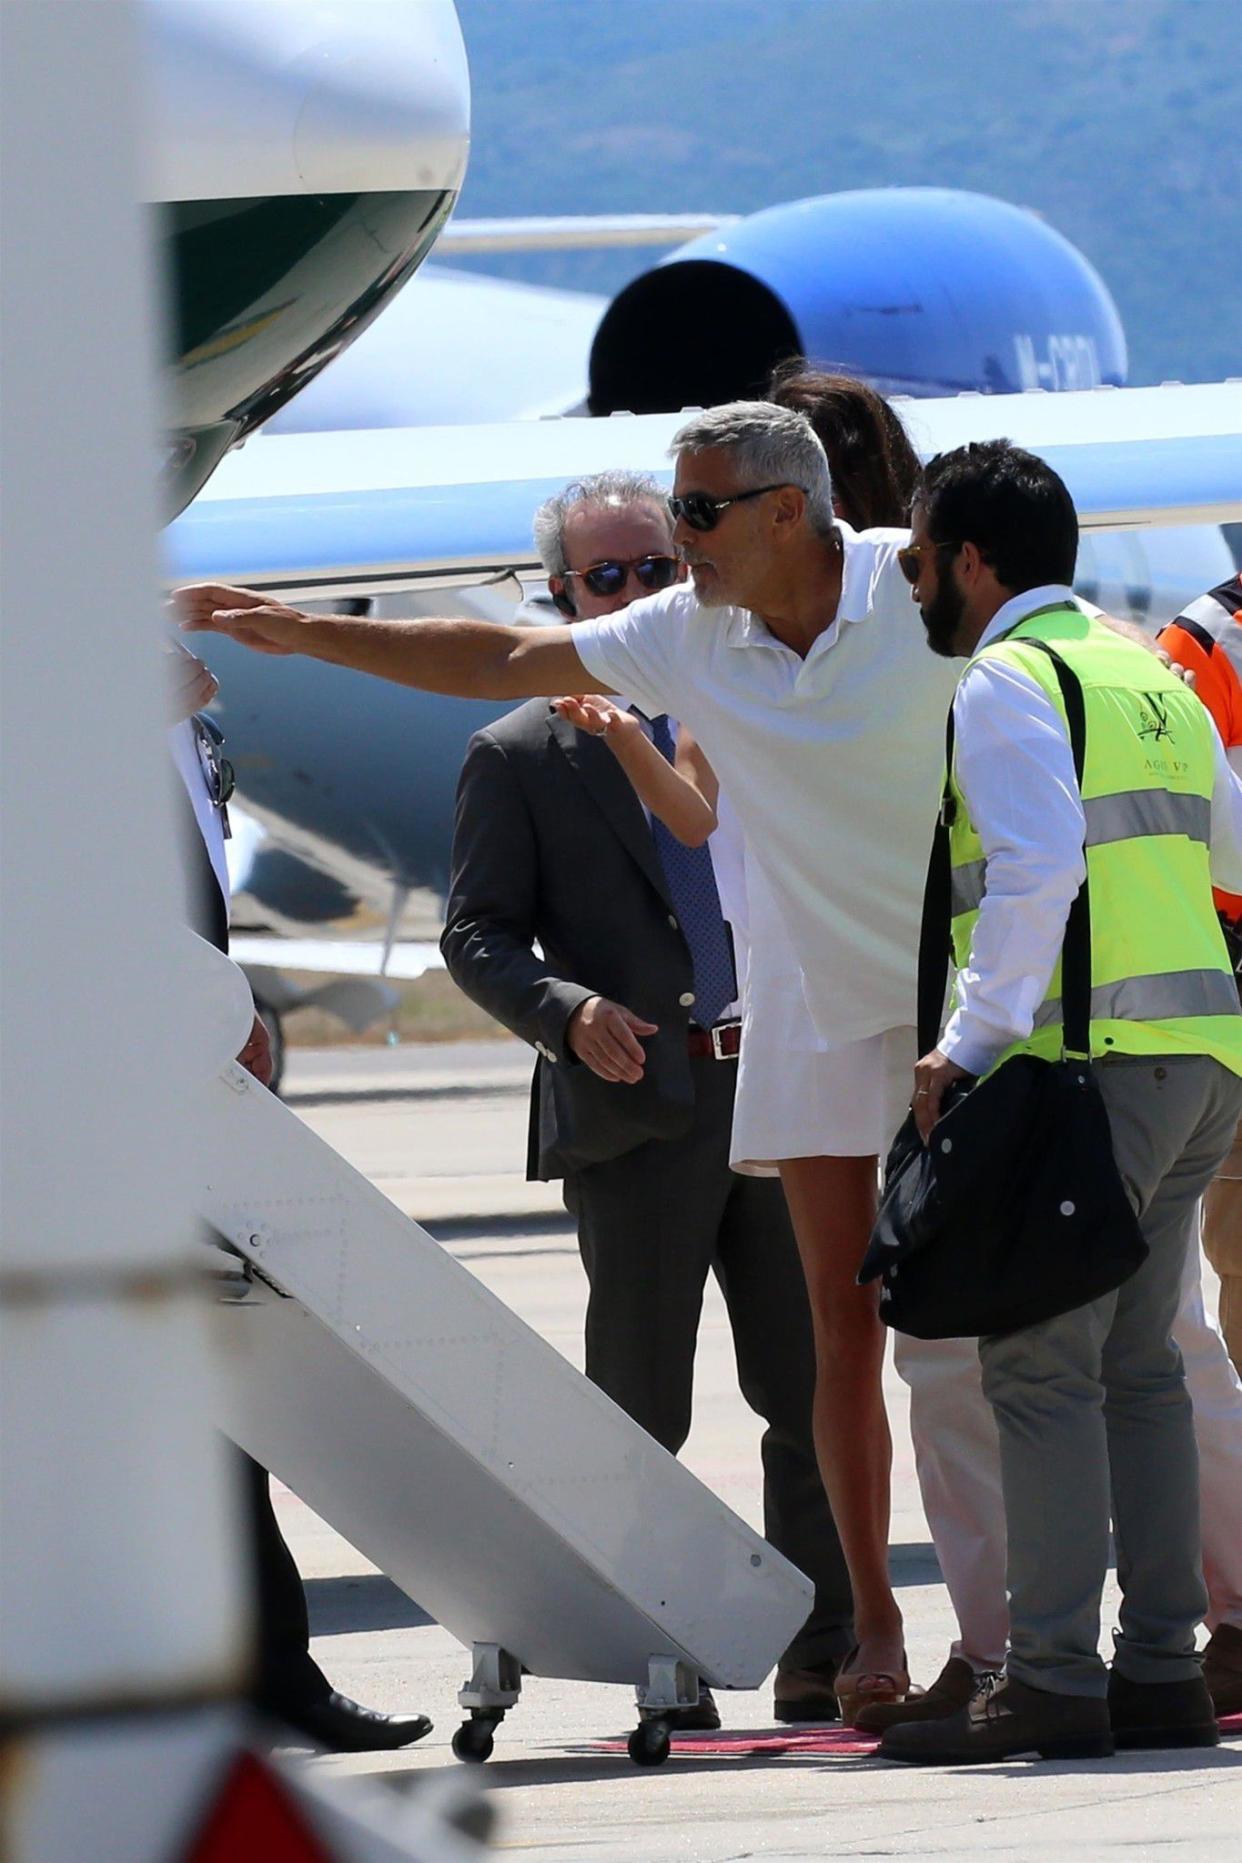 George Clooney was back on his feet just days after being hospitalized from a motorcycle accident. The actor was seen being helped onto his private jet by his wife Amal and airport staff in Sardinia on July 12, 2018.